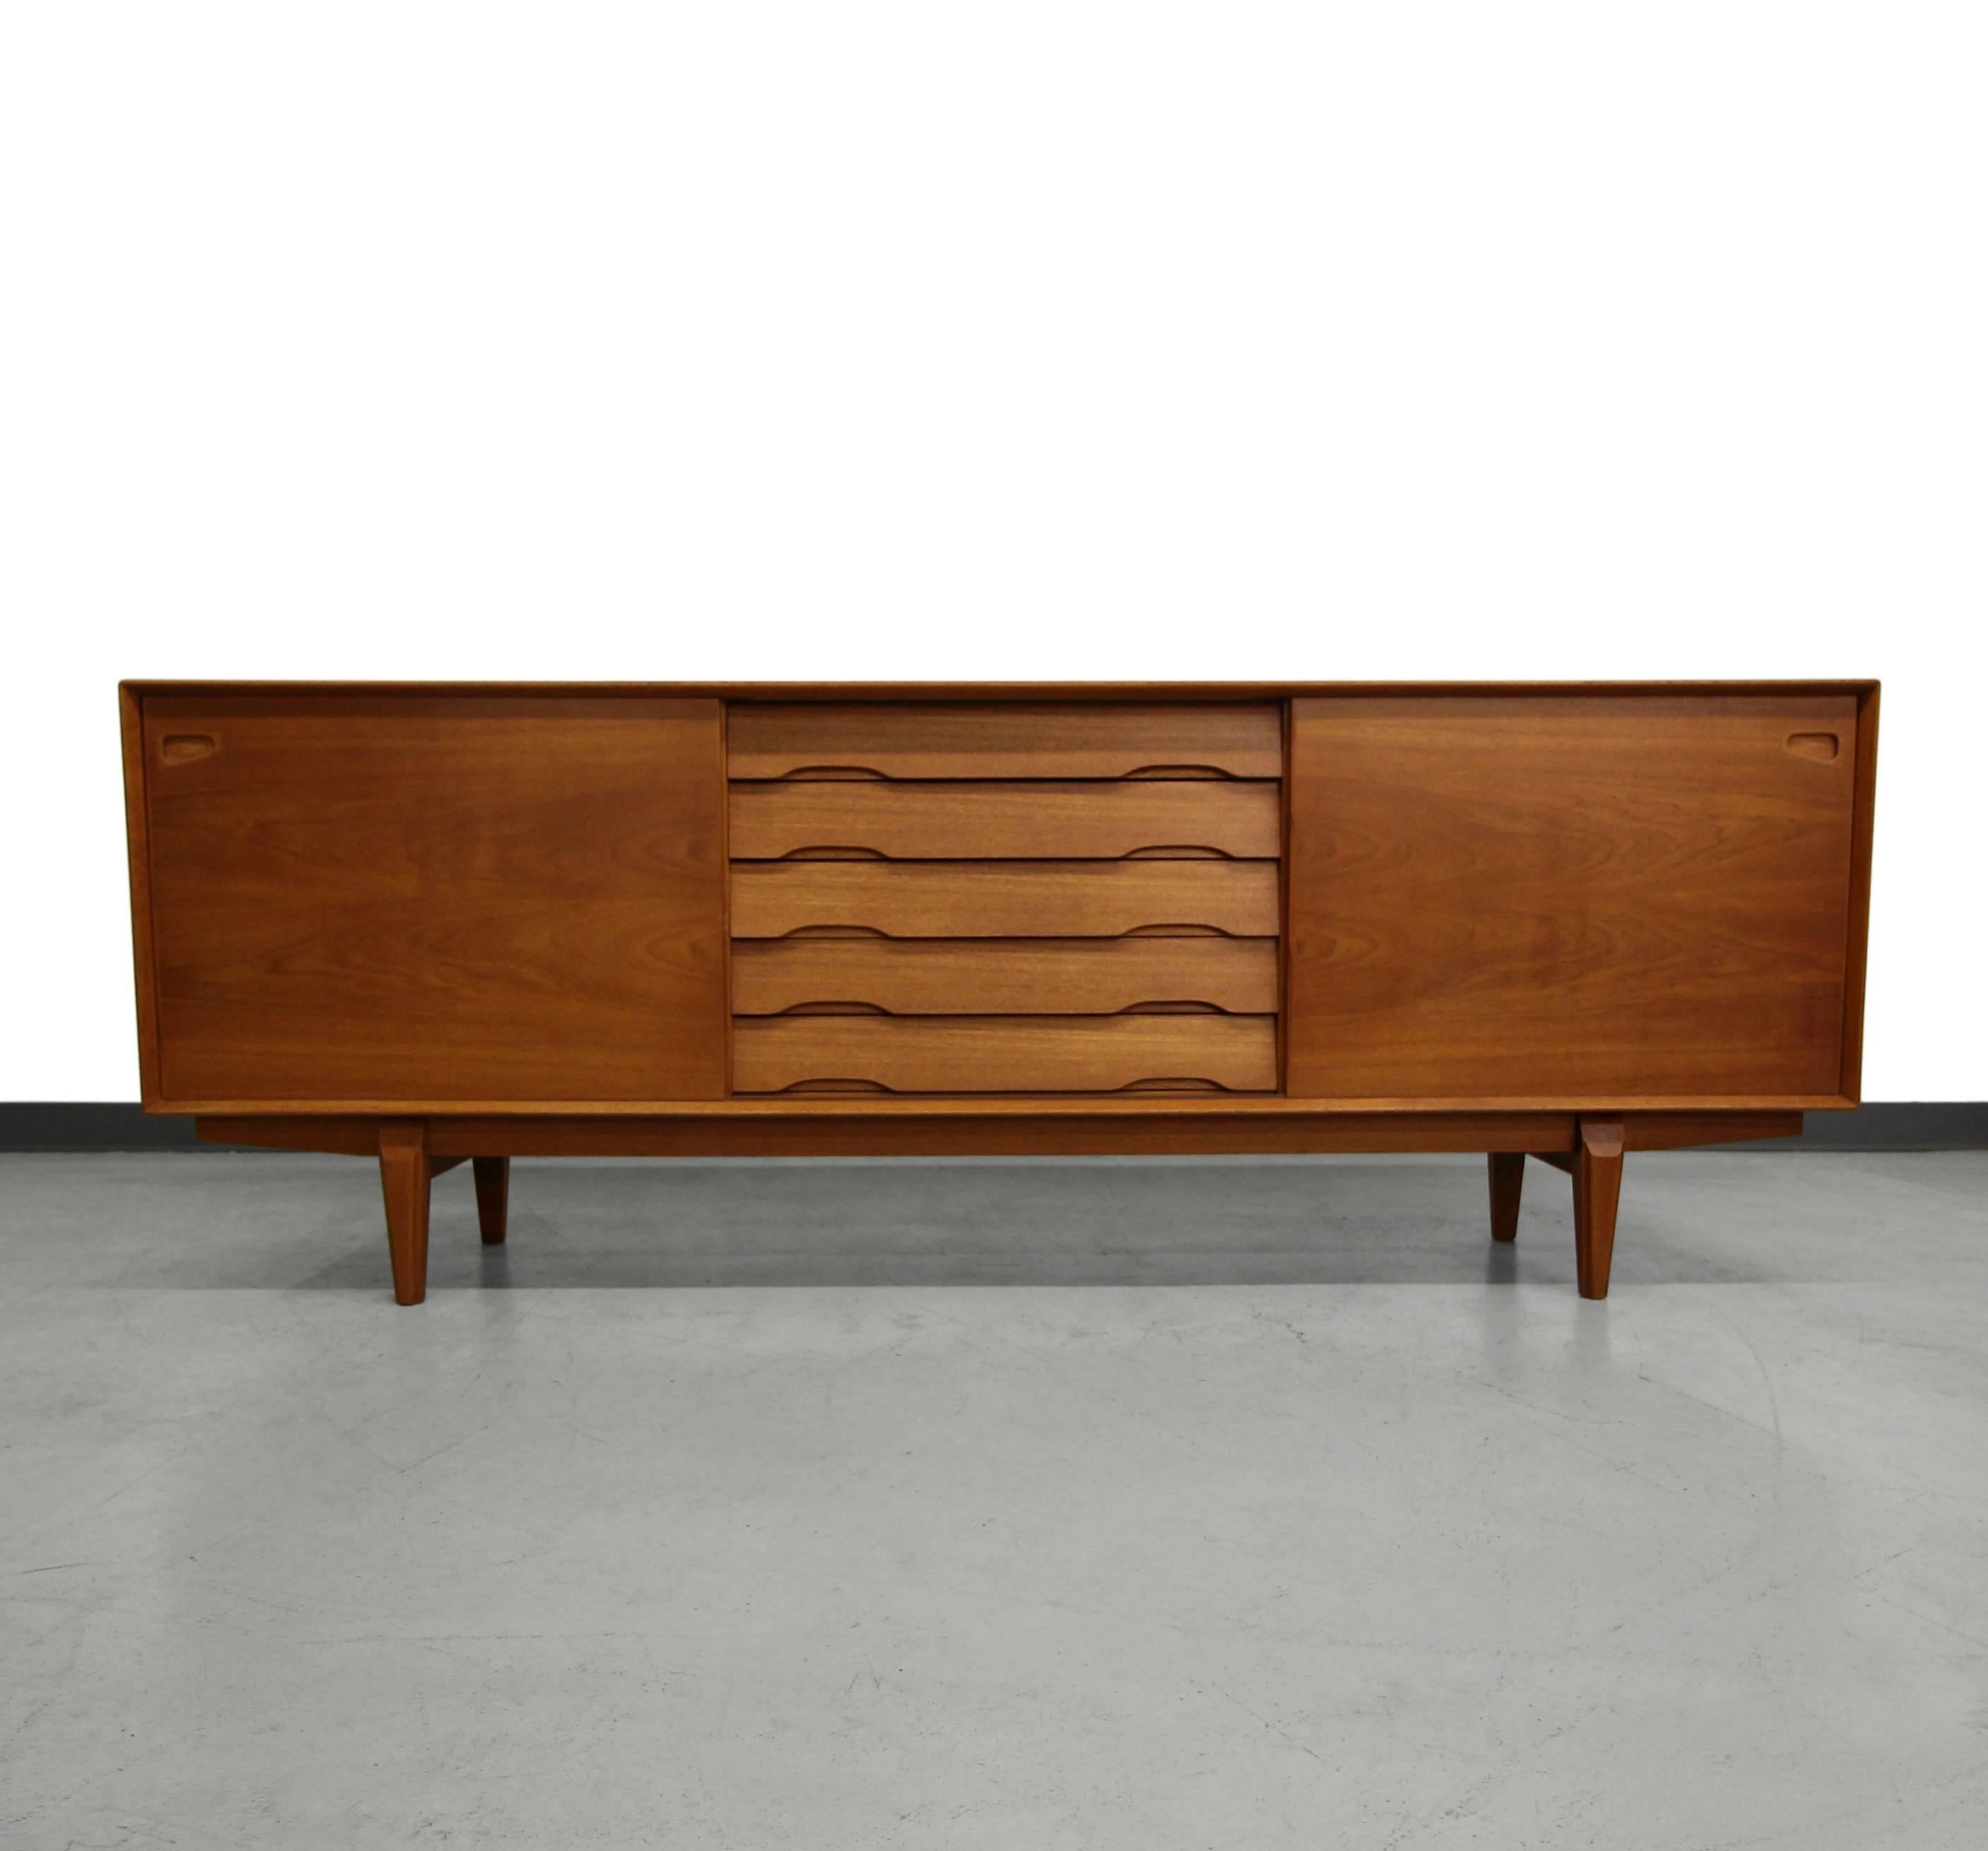 Measuring in at over 7 feet, this is a long, beautiful midcentury Danish teak credenza by Rosengren Hansen. A high quality, heavy piece with gorgeous solid teak edges and legs. Credenza features five staggered centre drawers that create dimensional